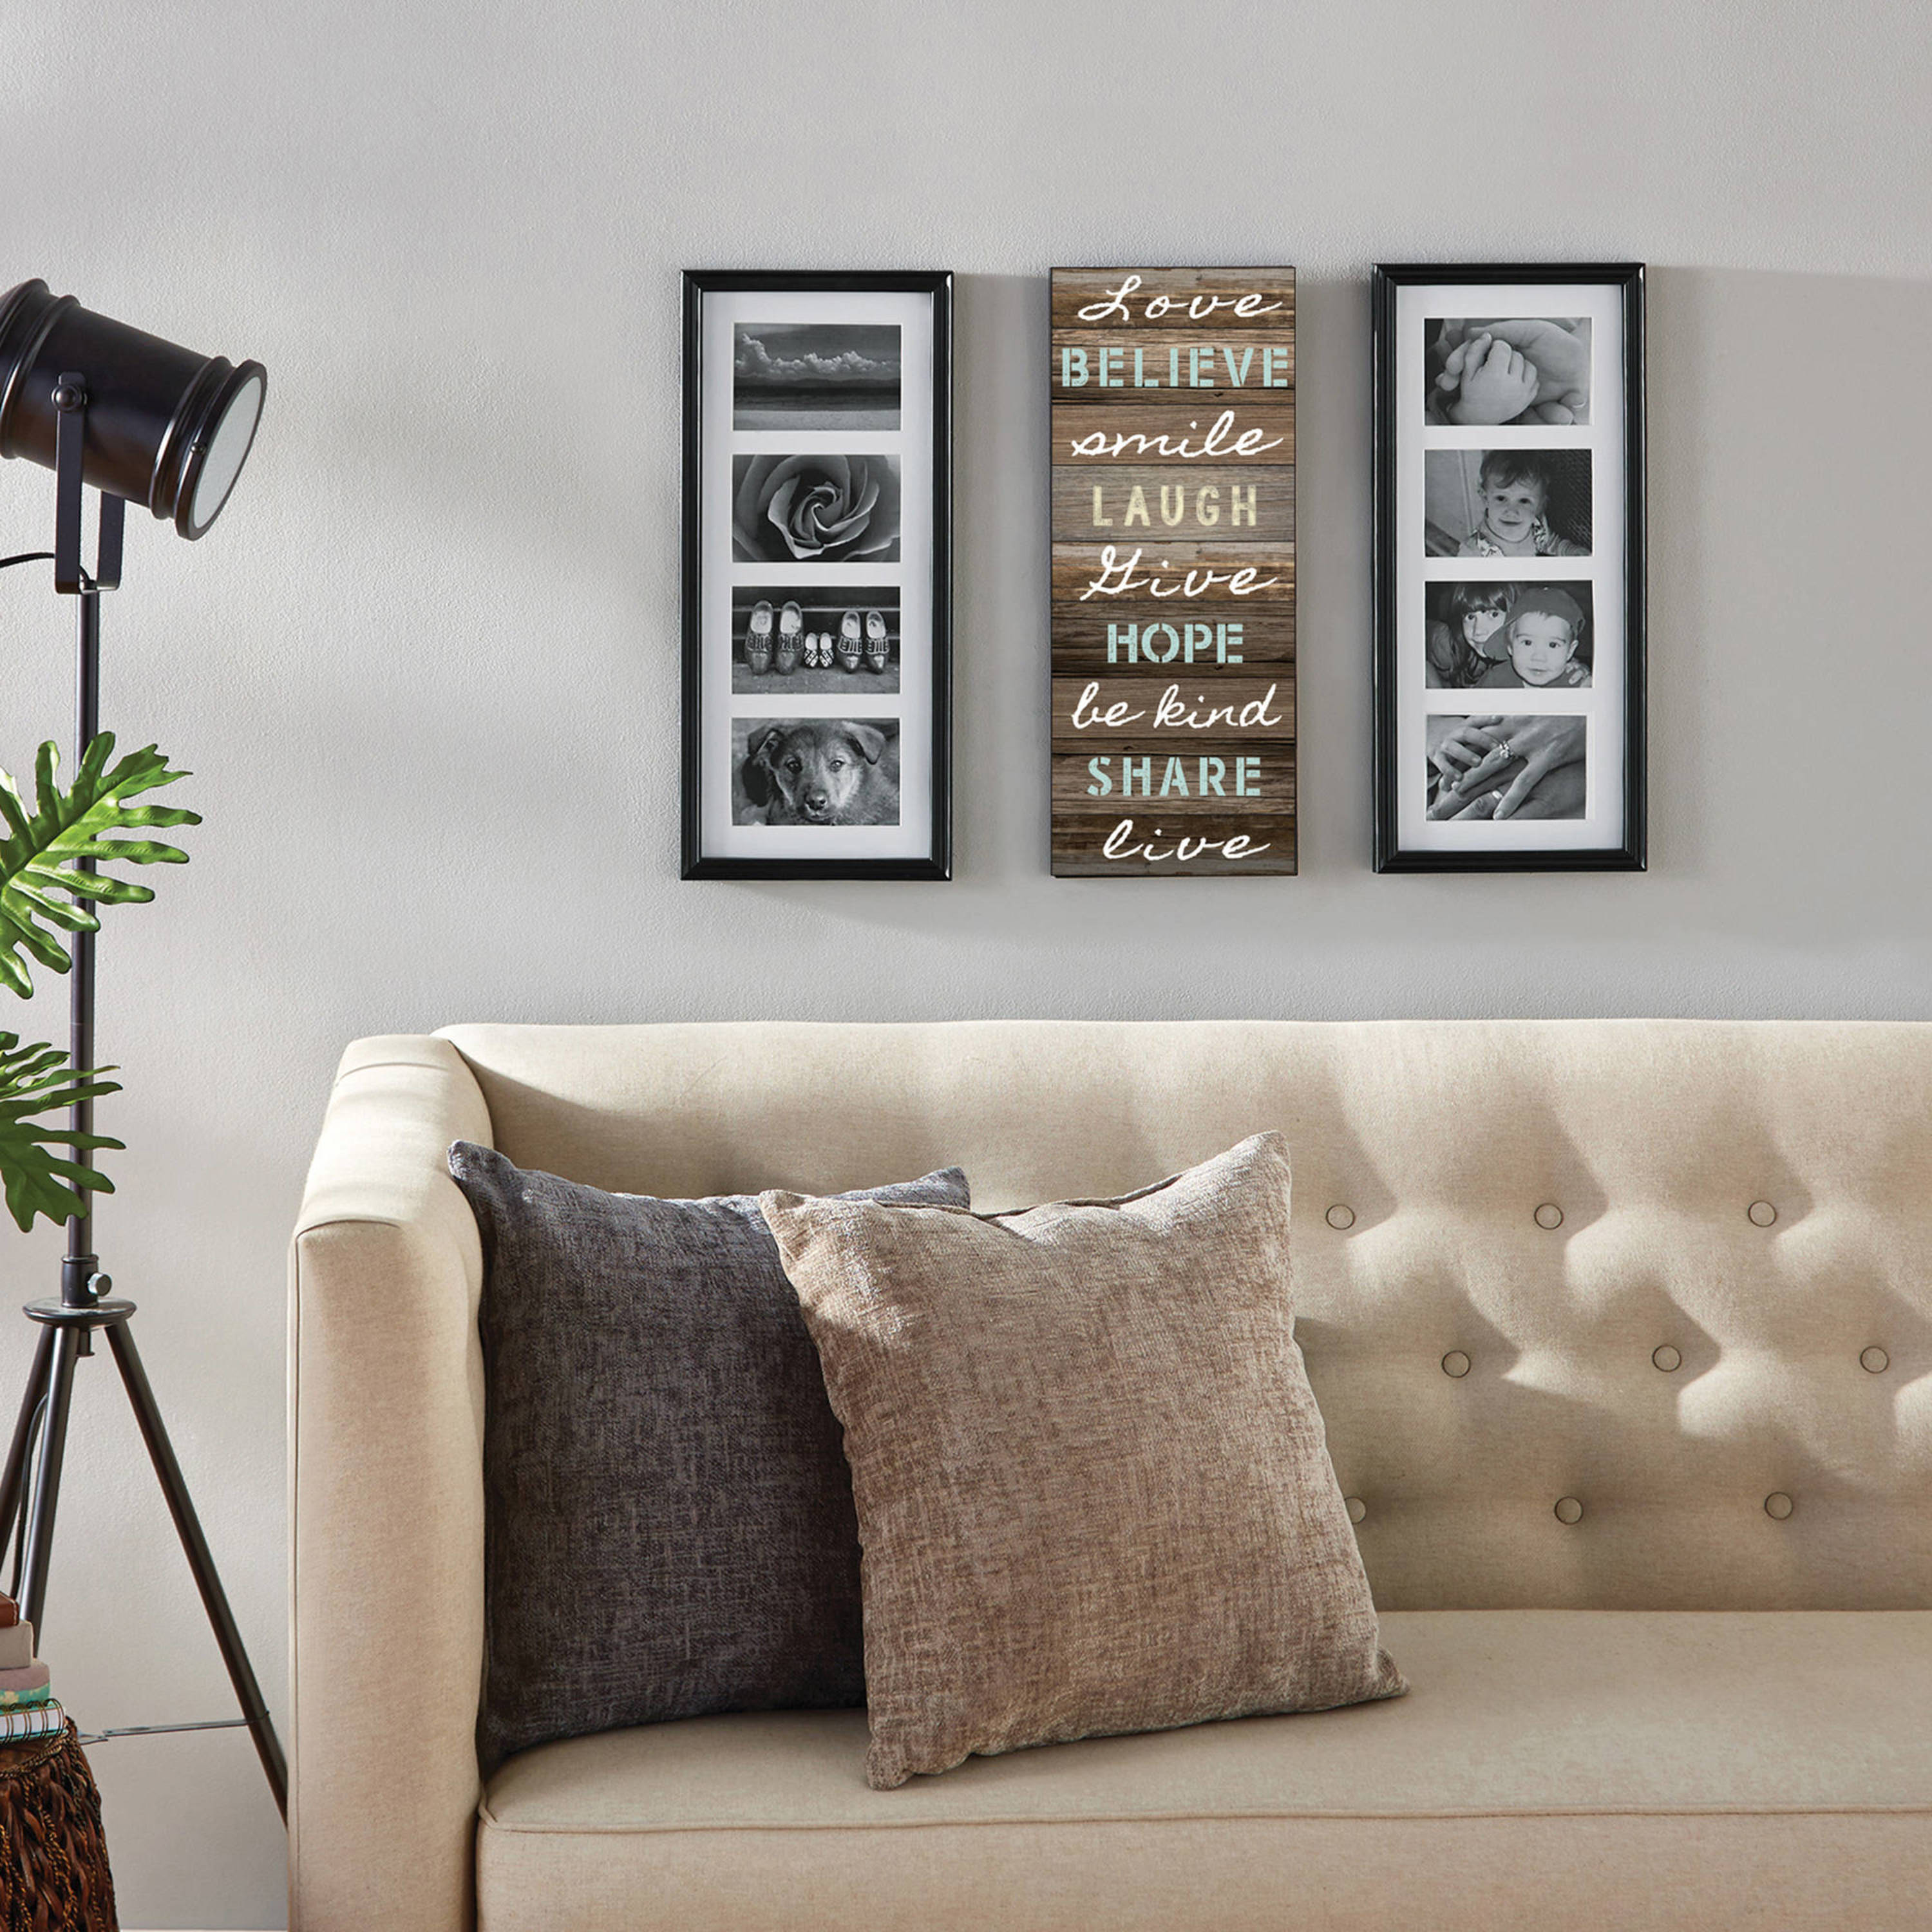 Mainstays Collage Picture Frames with Sentiment Plaque in Black (2 Frames and a Sentiment Wall Decor) - image 1 of 5